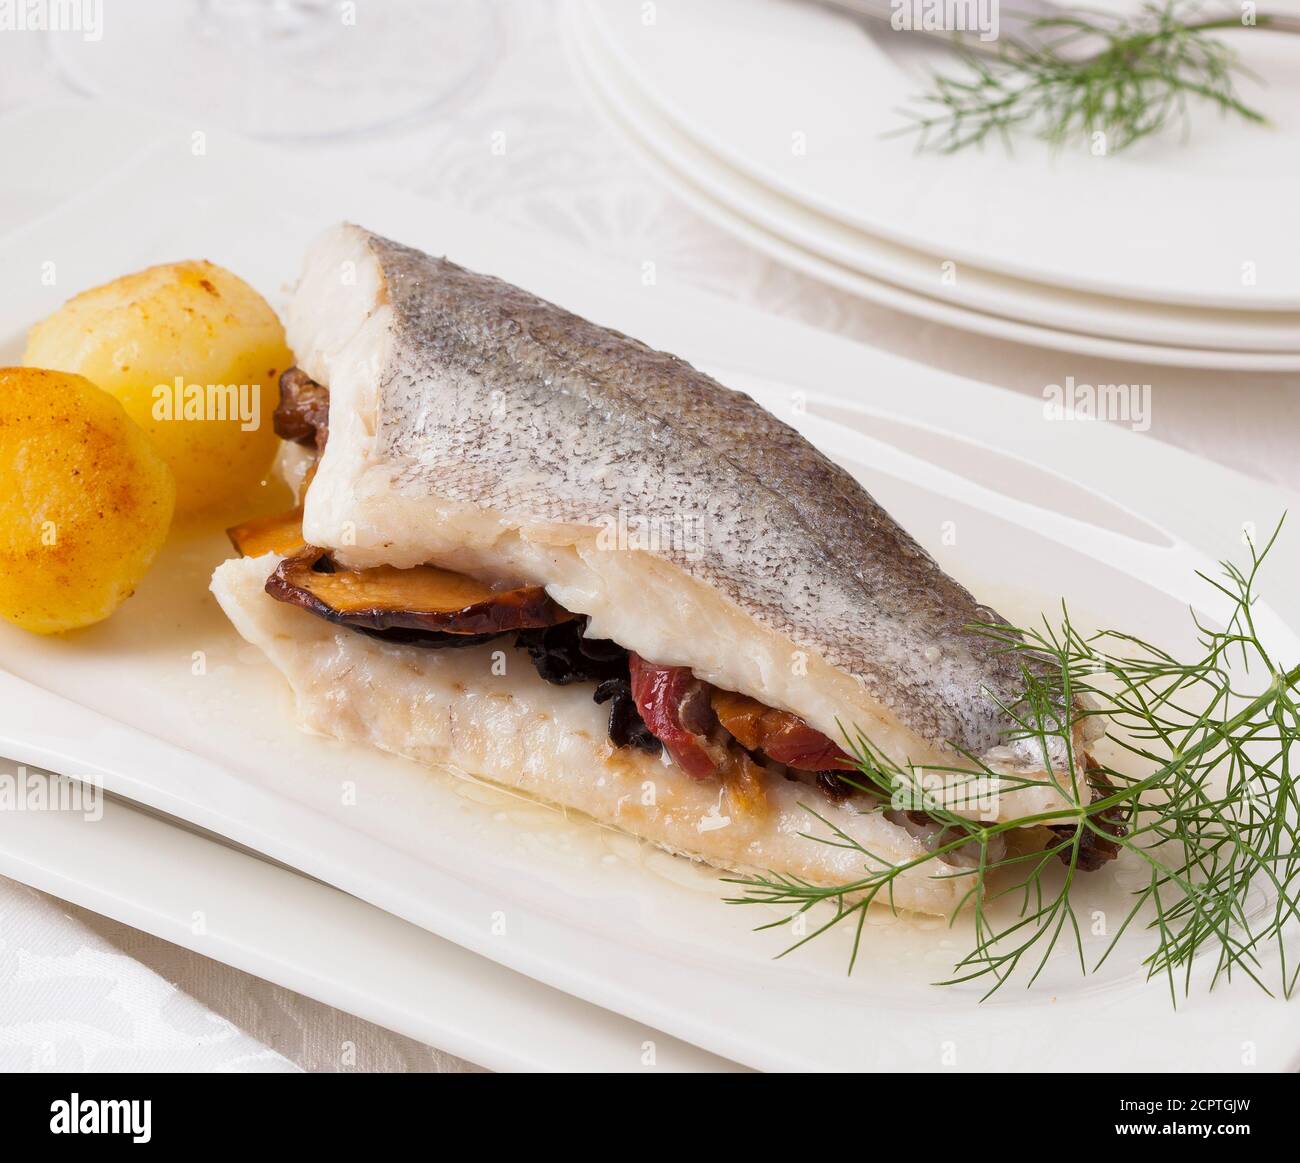 Fish fillet stuffed with vegetables. Stock Photo